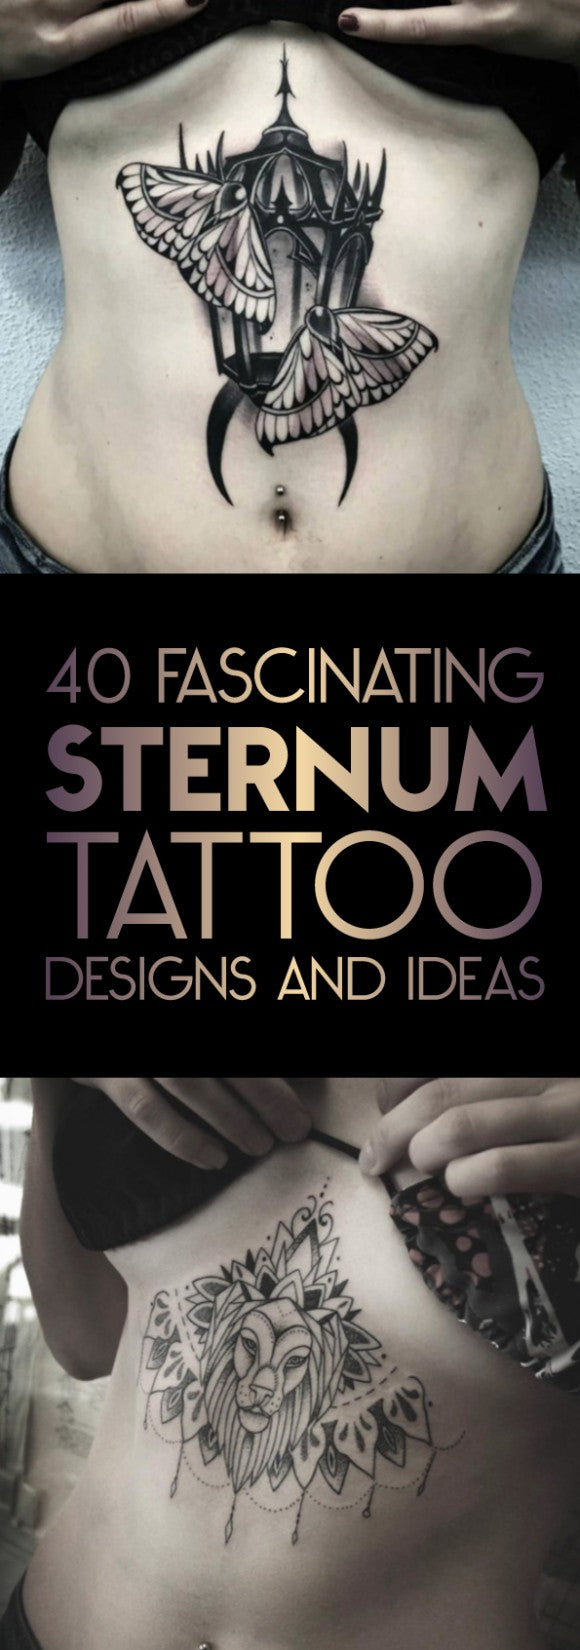 40 Fascinating Sternum Tattoo Designs and Ideas